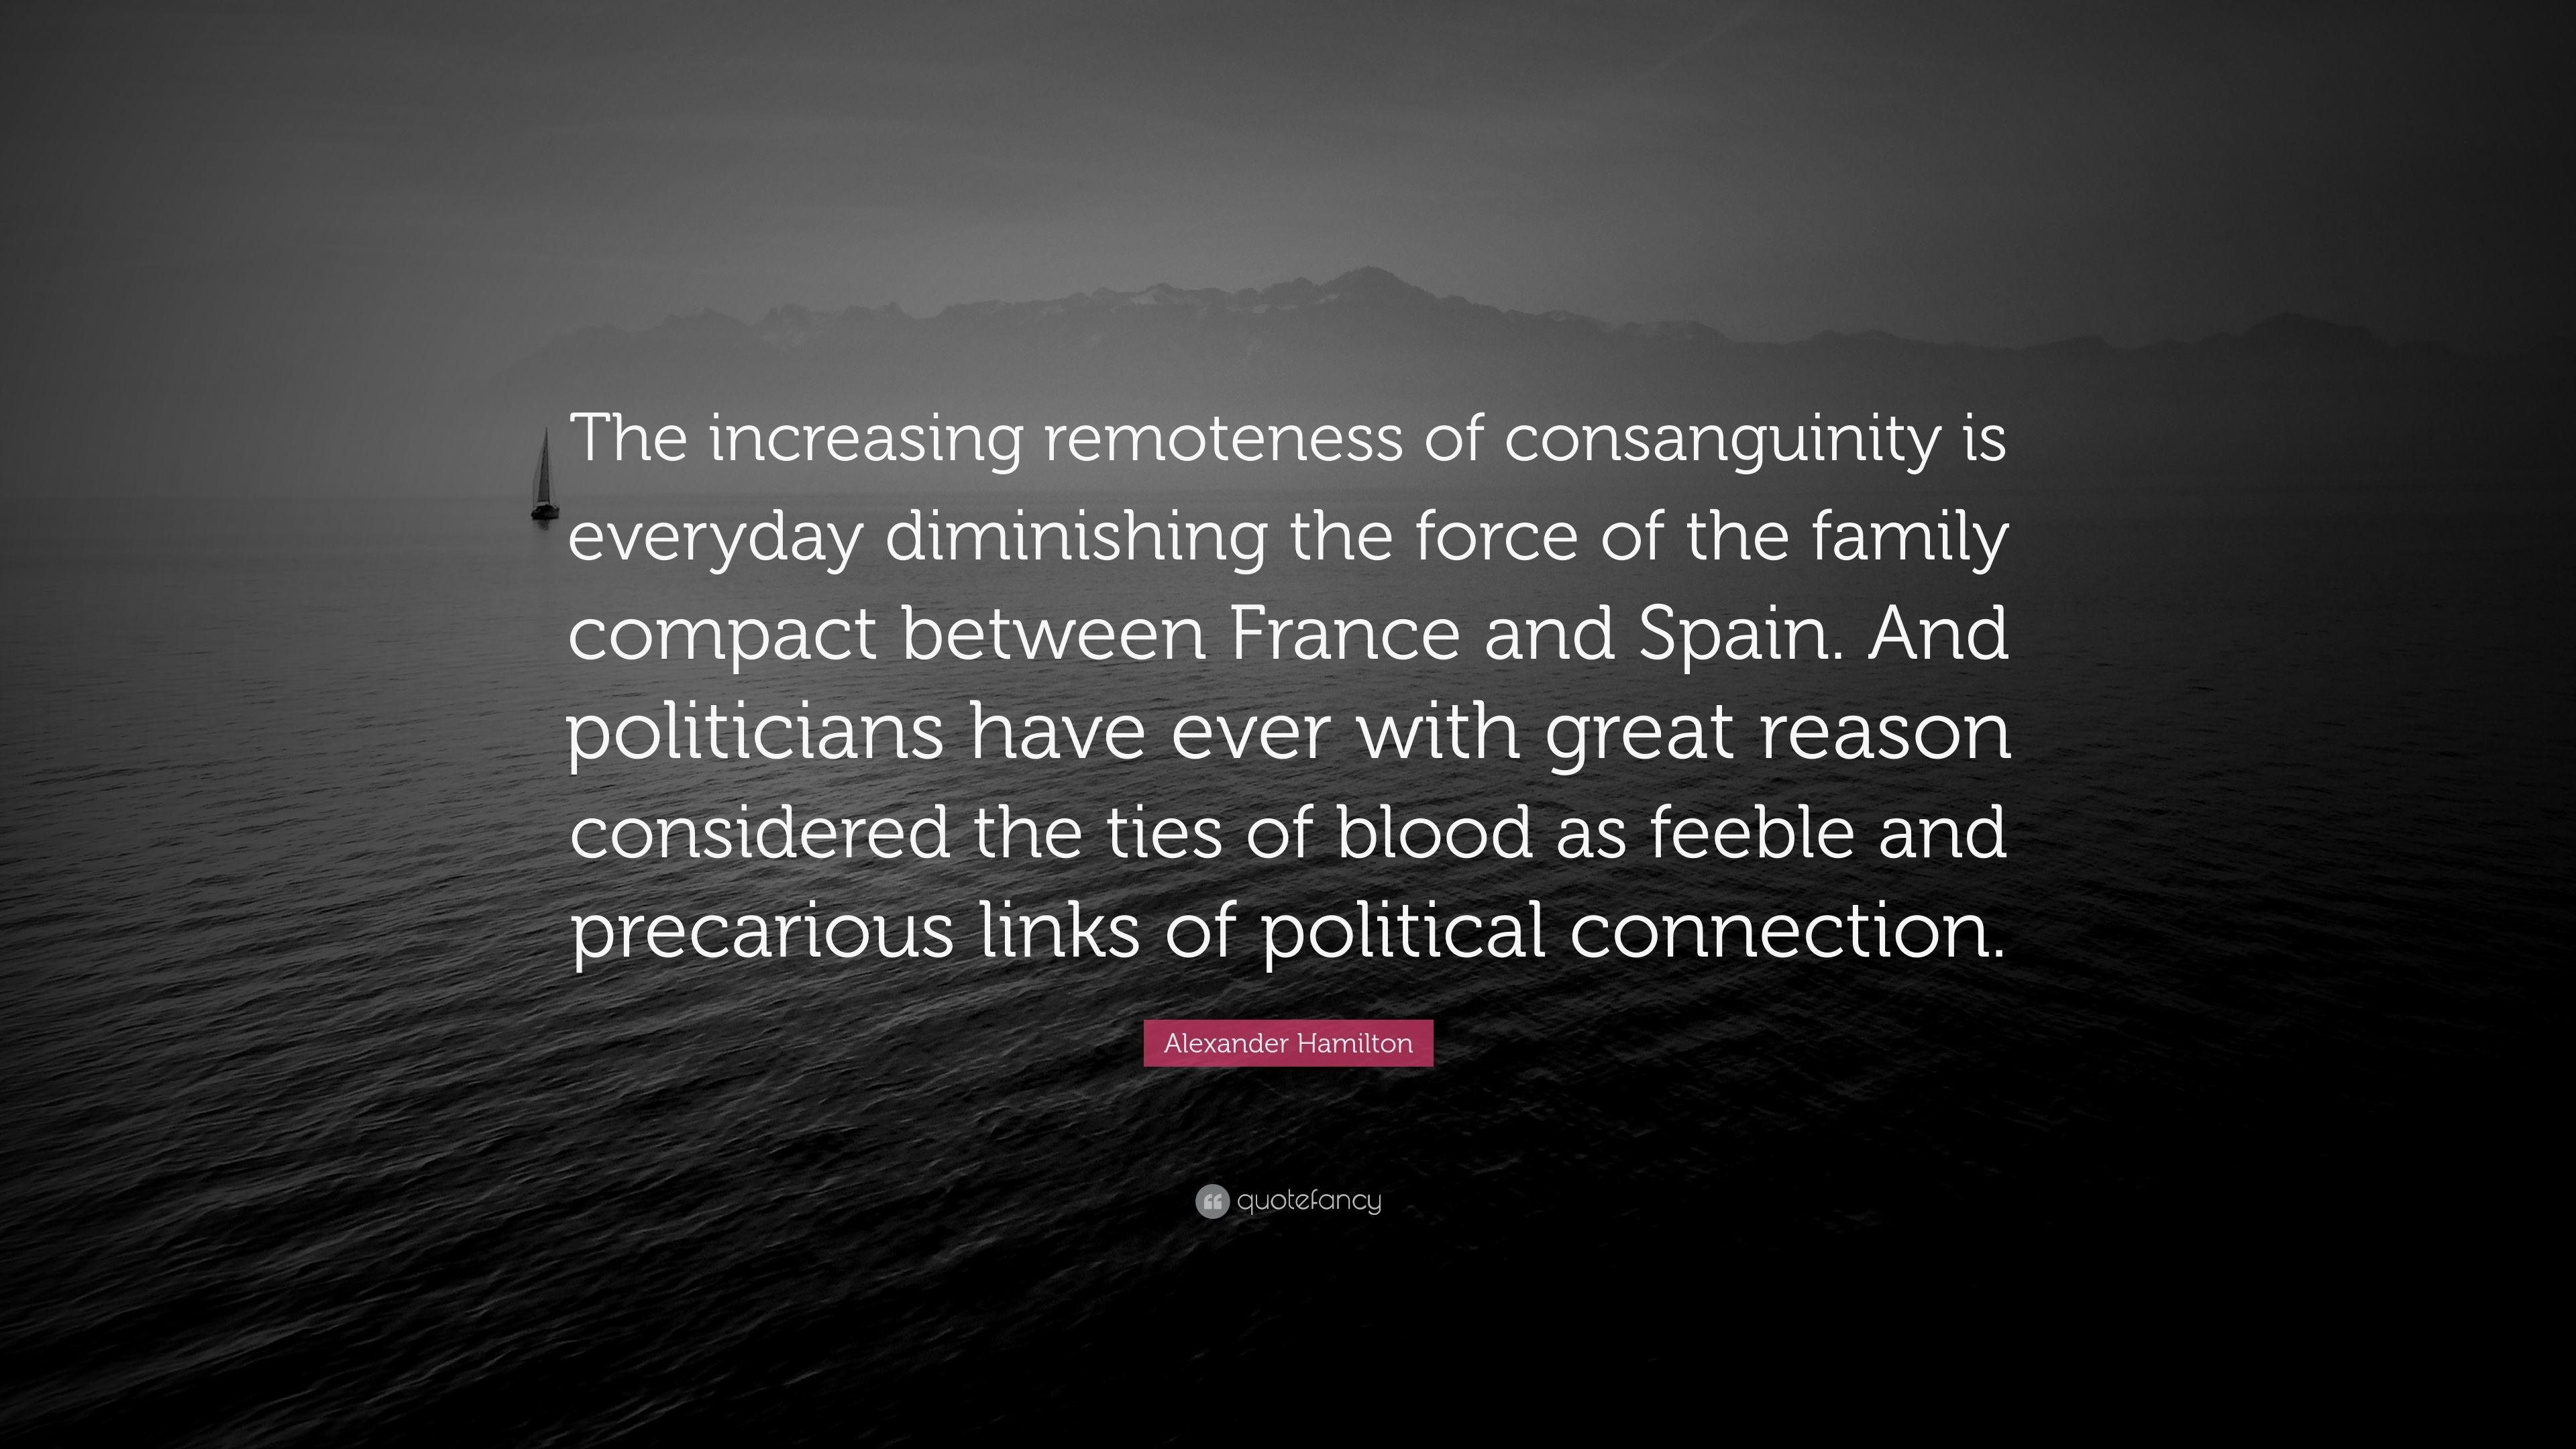 3840x2160 Alexander Hamilton Quote: “The increasing remoteness of consanguinity is  everyday diminishing the force of